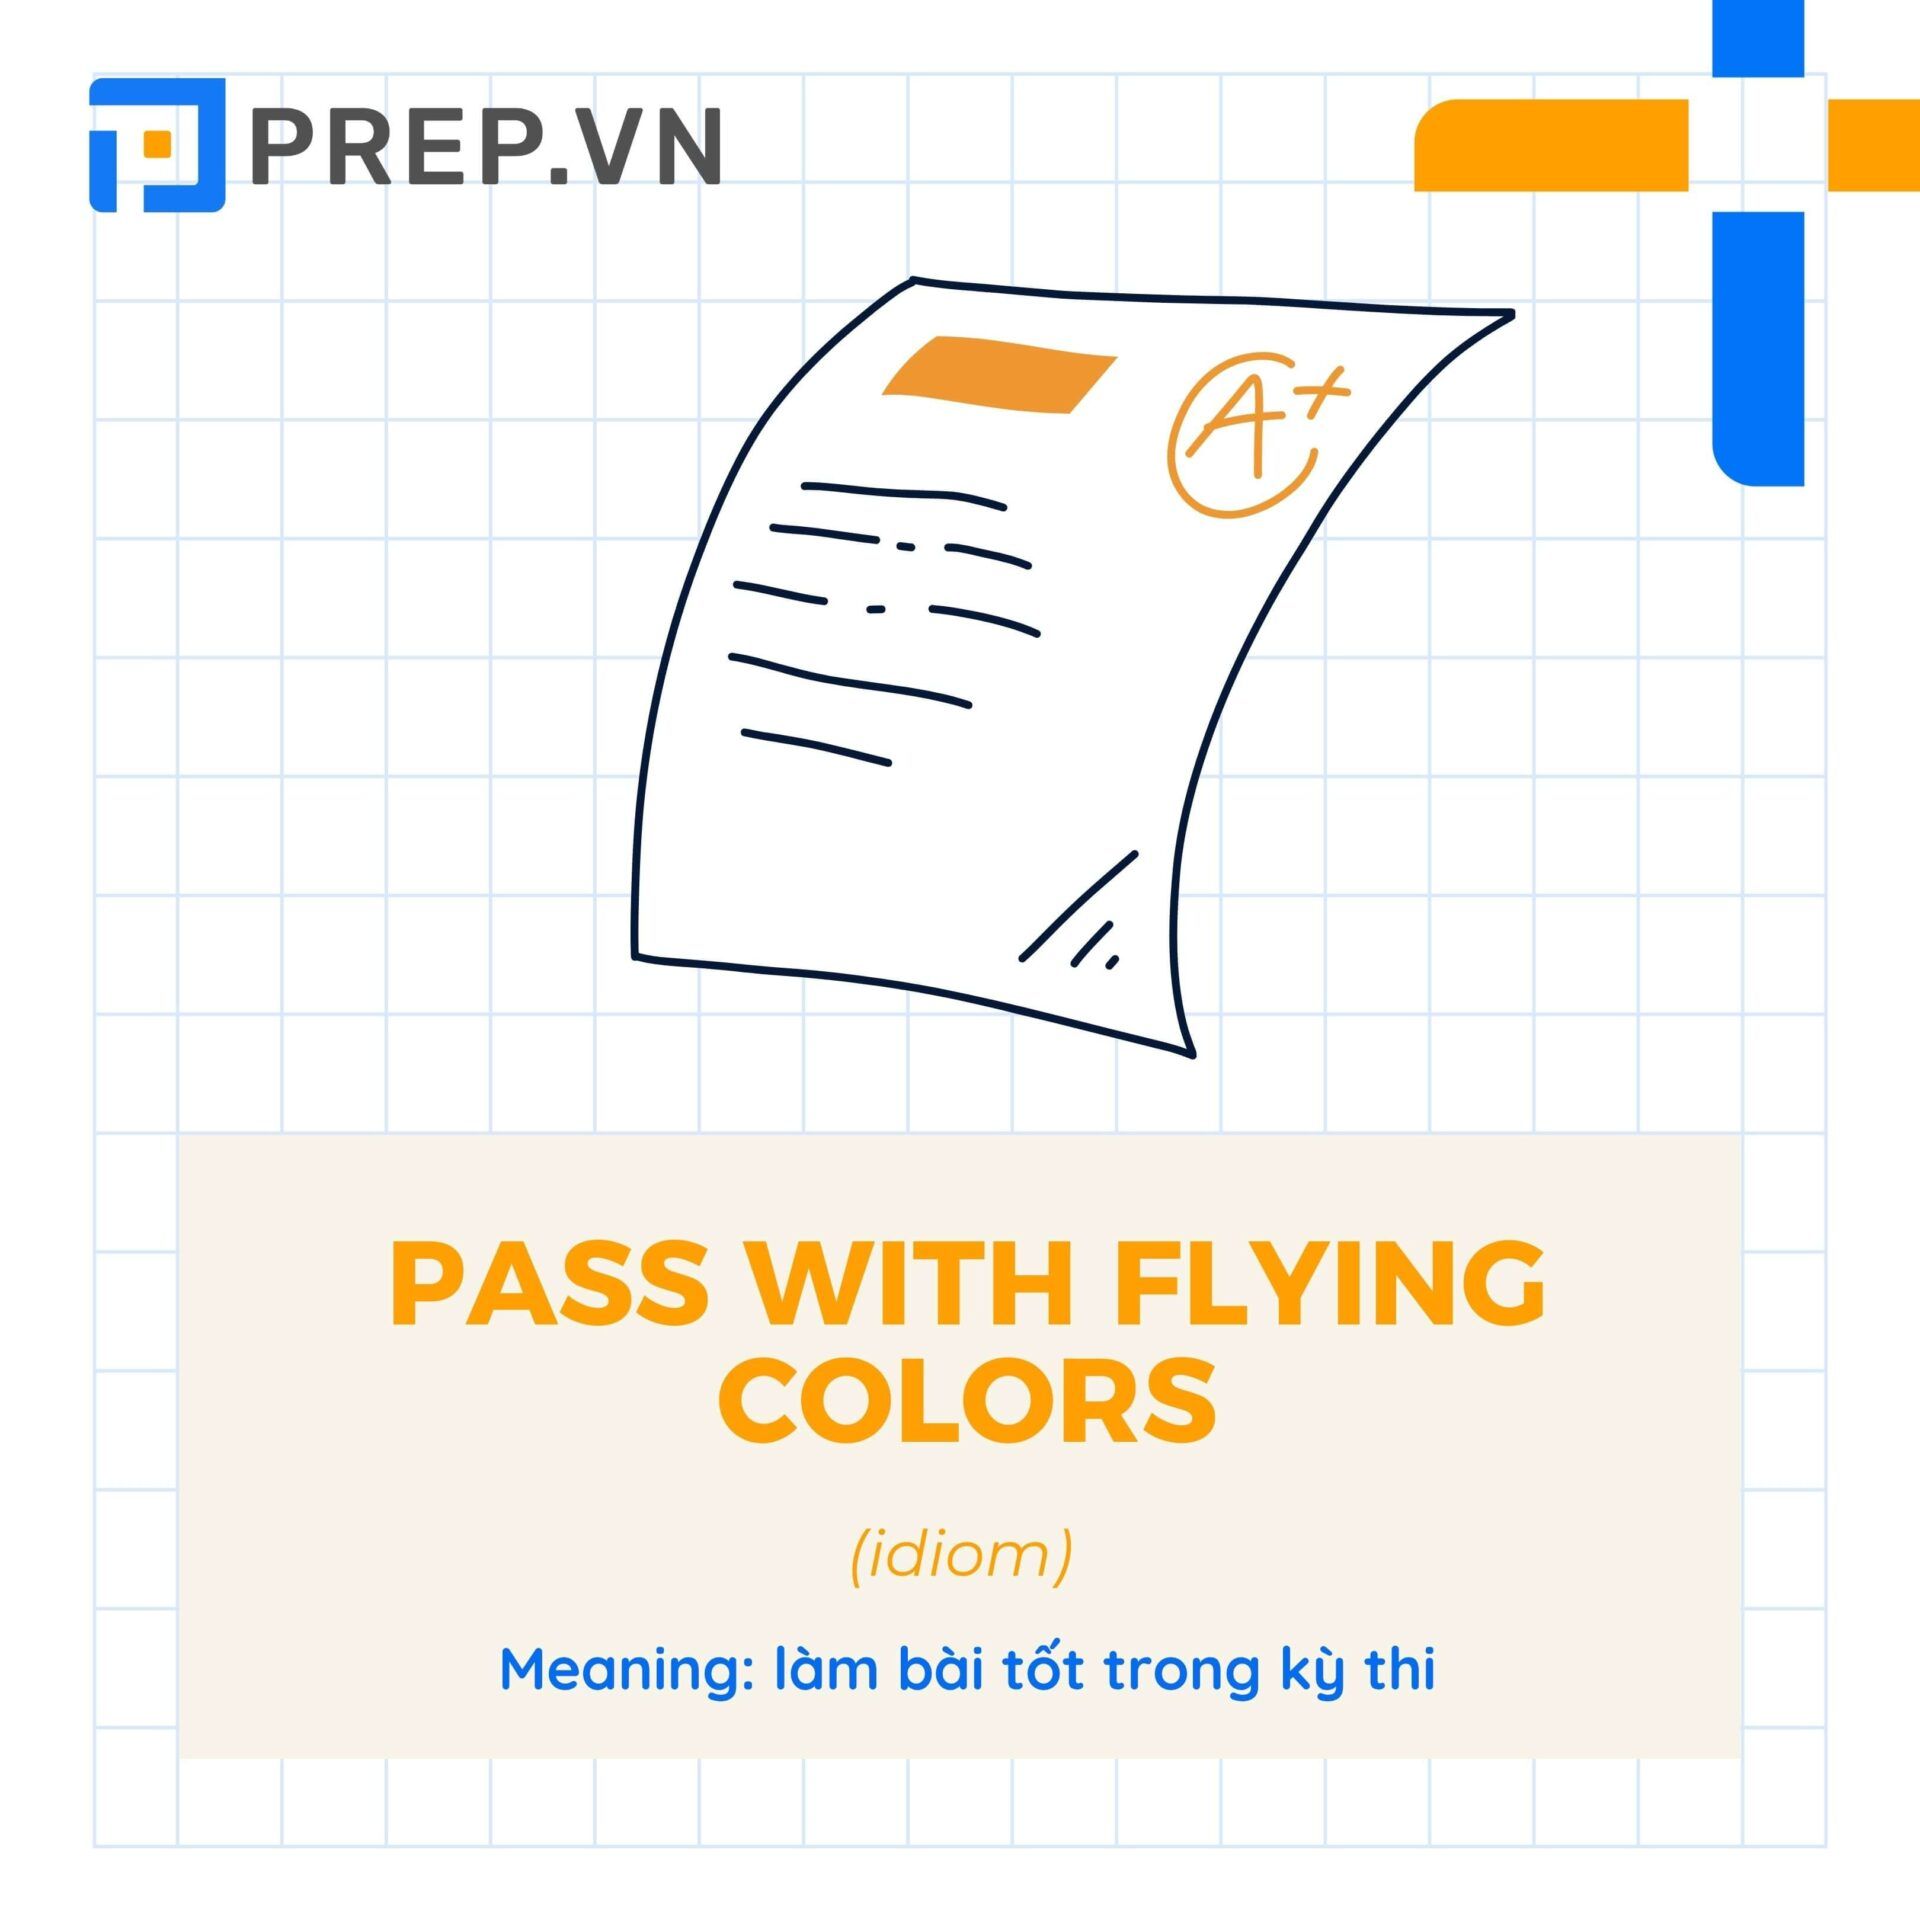 Idiom Pass with flying colors